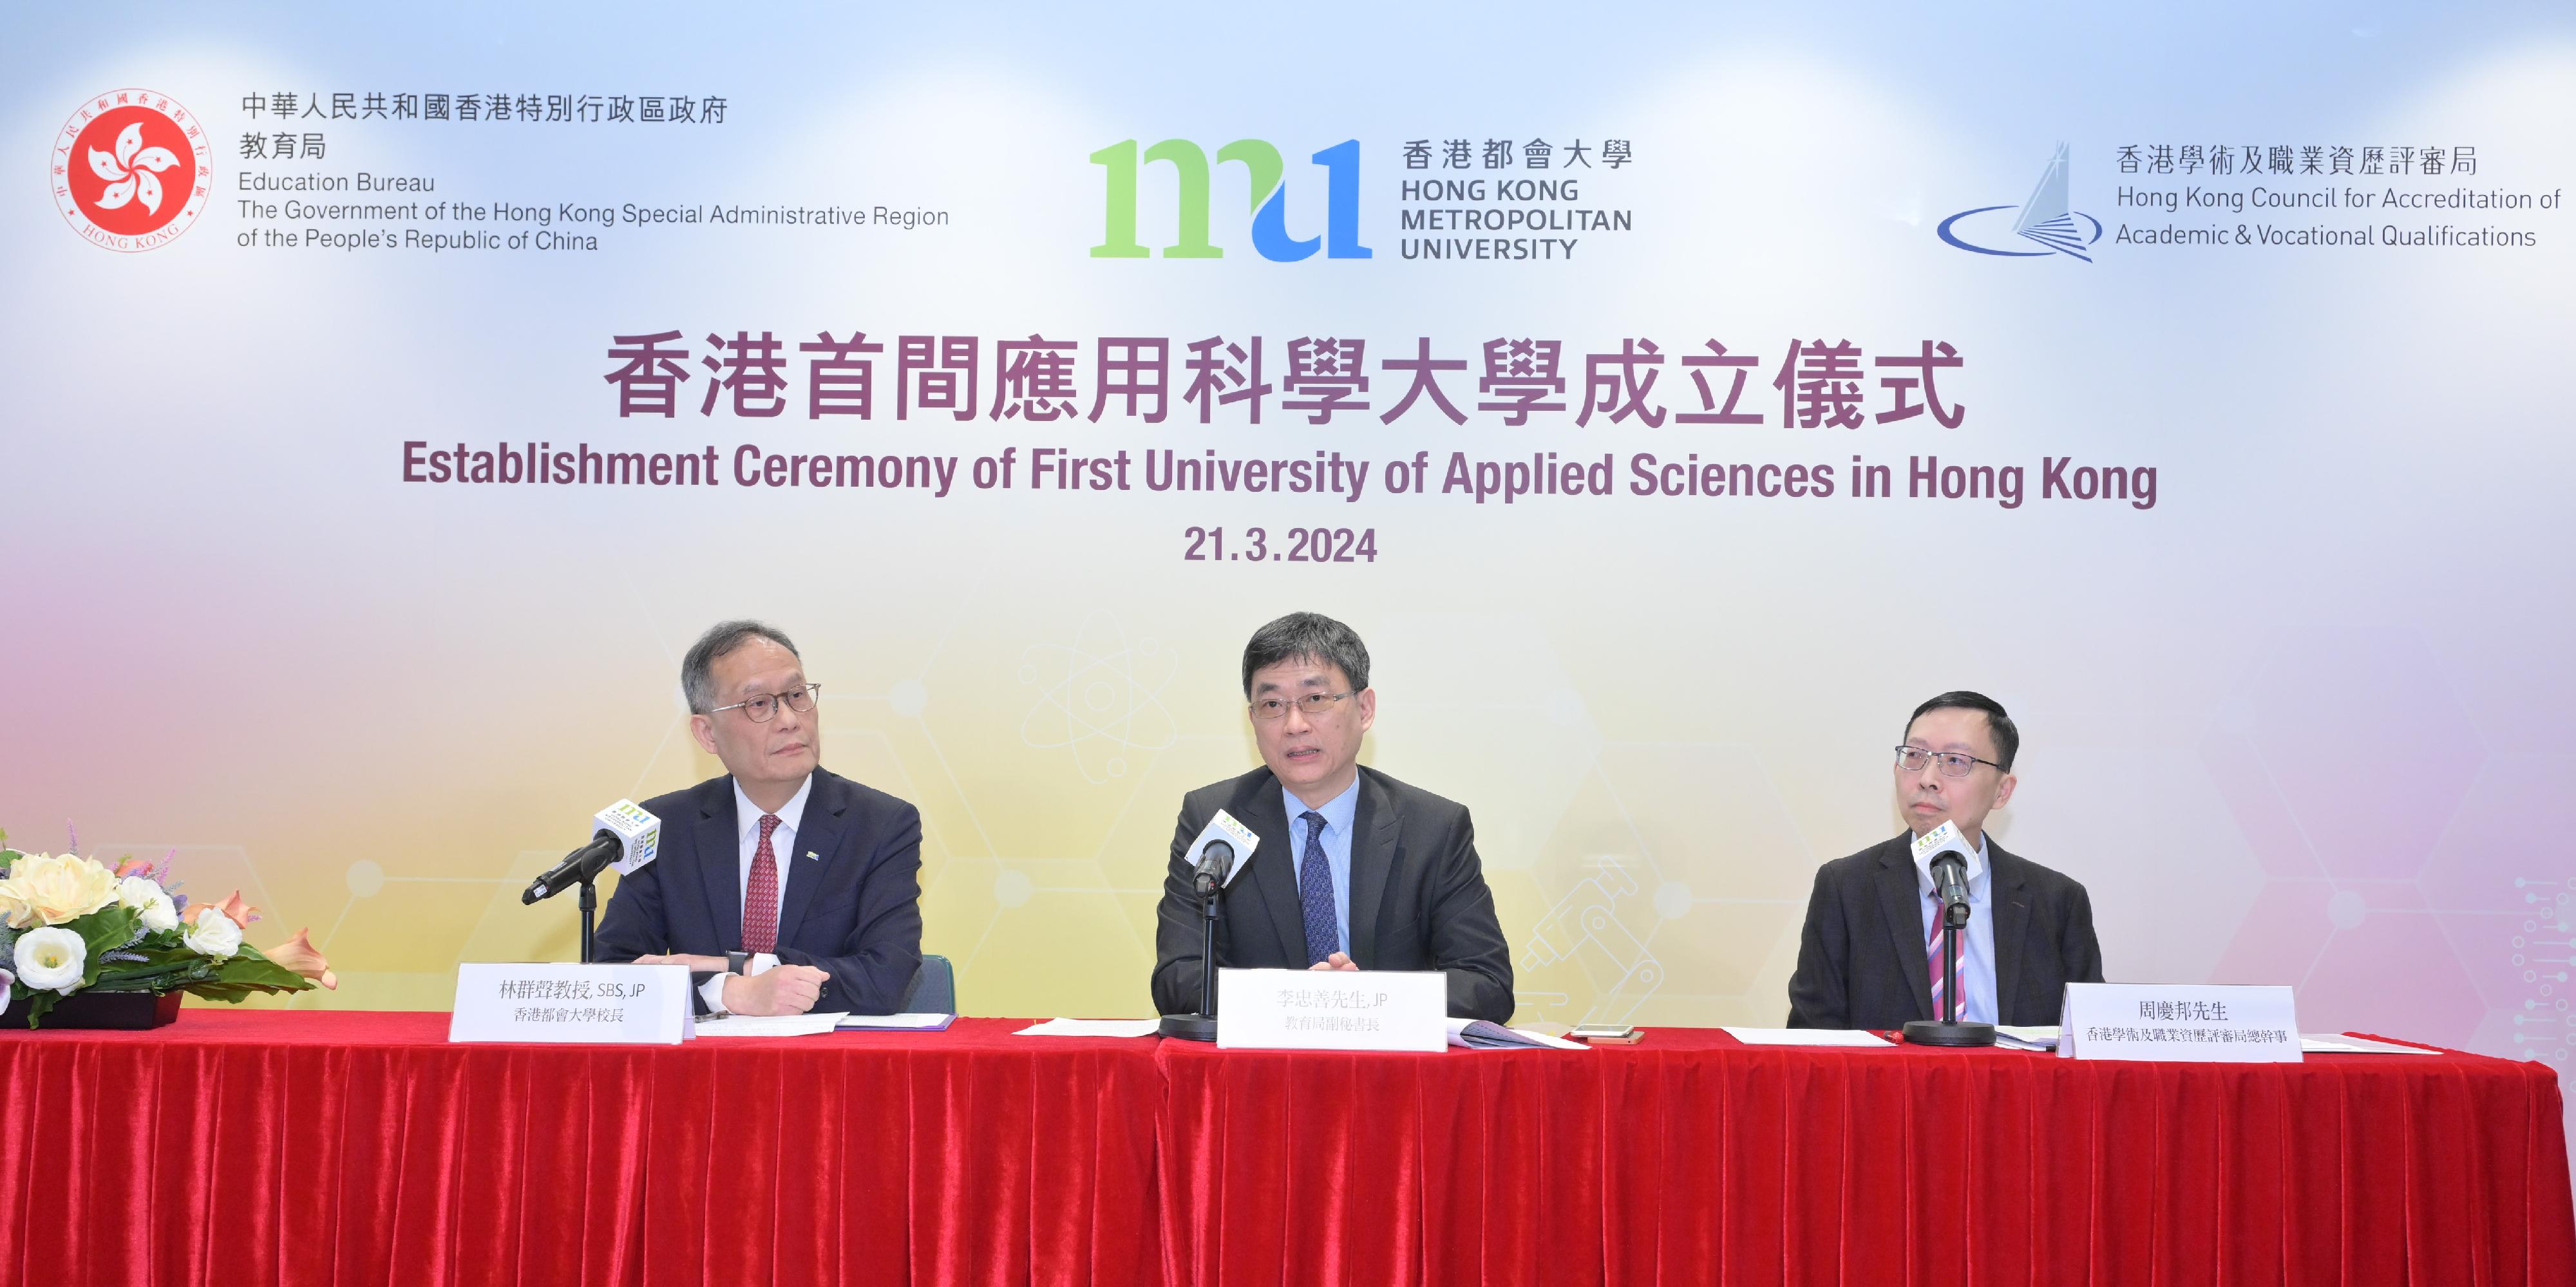 The Education Bureau announced today (March 21) that the Hong Kong Metropolitan University has become the first university of applied sciences in Hong Kong. Photo shows the Deputy Secretary for Education, Mr Esmond Lee (centre); the President of the Hong Kong Metropolitan University, Professor Paul Lam (left); and the Executive Director of the Hong Kong Council for Accreditation of Academic and Vocational Qualifications, Mr Albert Chow (right), hosting the media briefing.